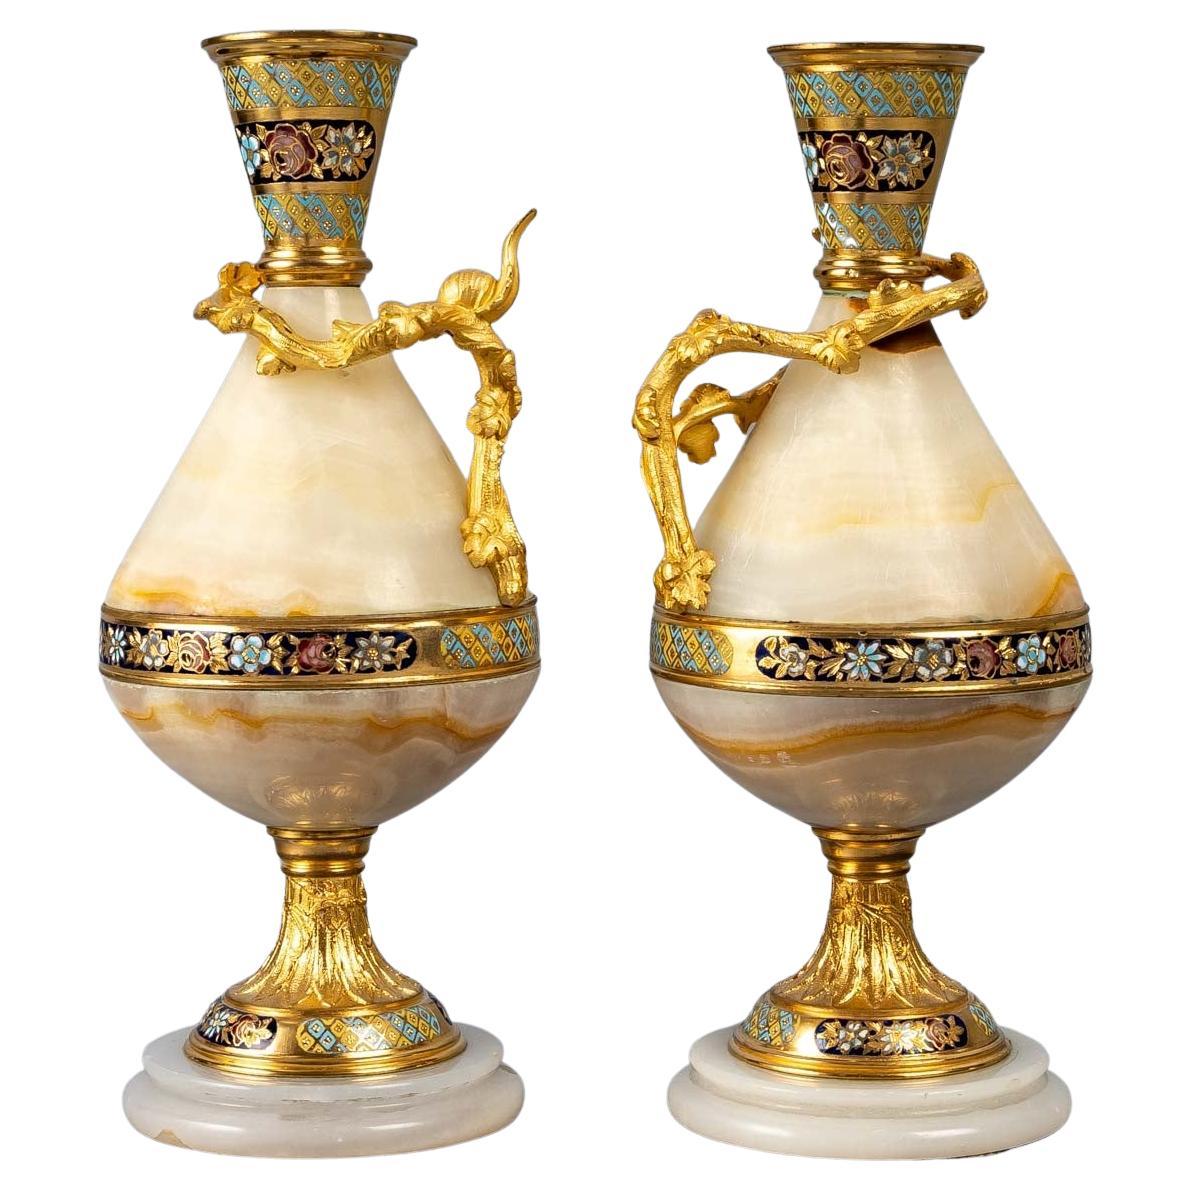 Pair of Onyx and Gilded Bronze and Cloisonné Vases